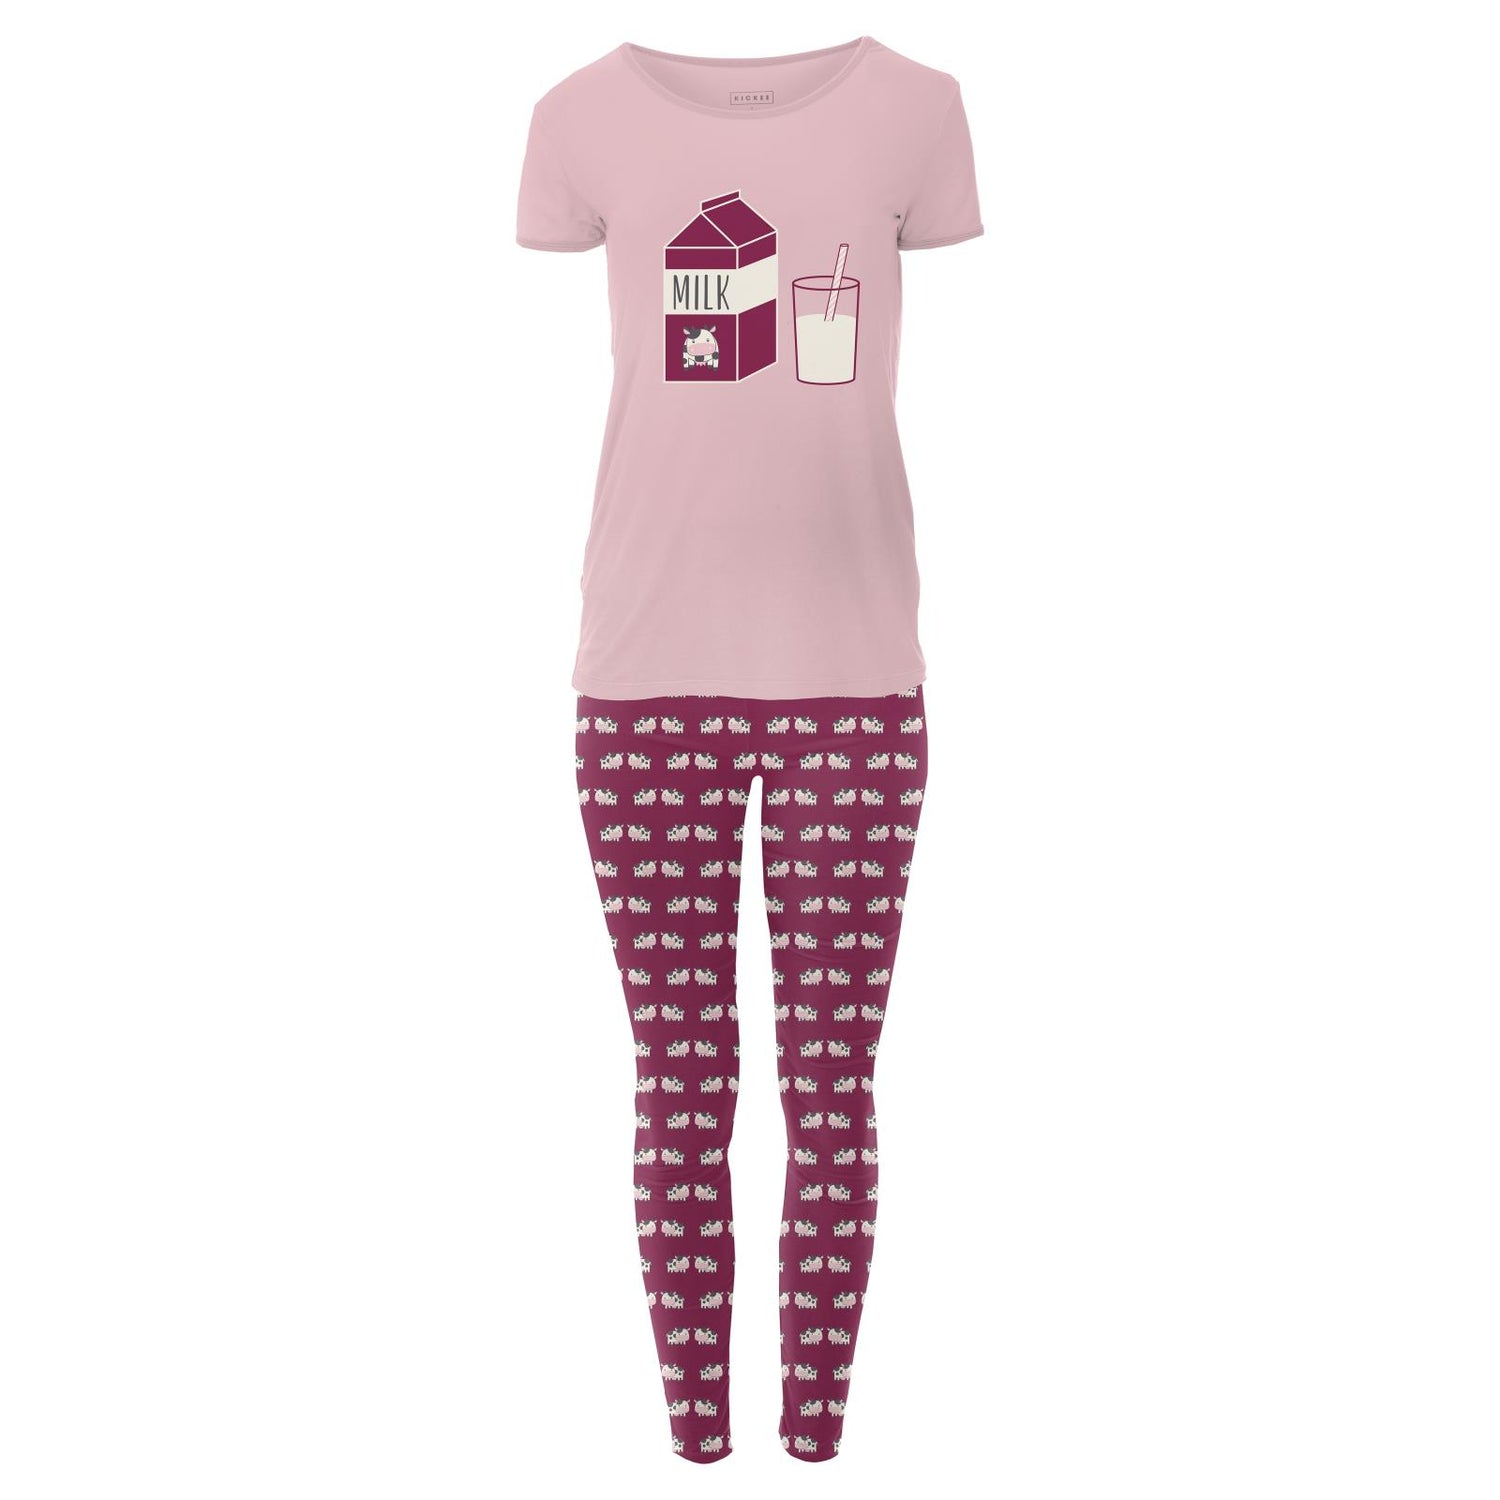 Women's Short Sleeve Graphic Tee Fitted Pajama Set in Berry Cow